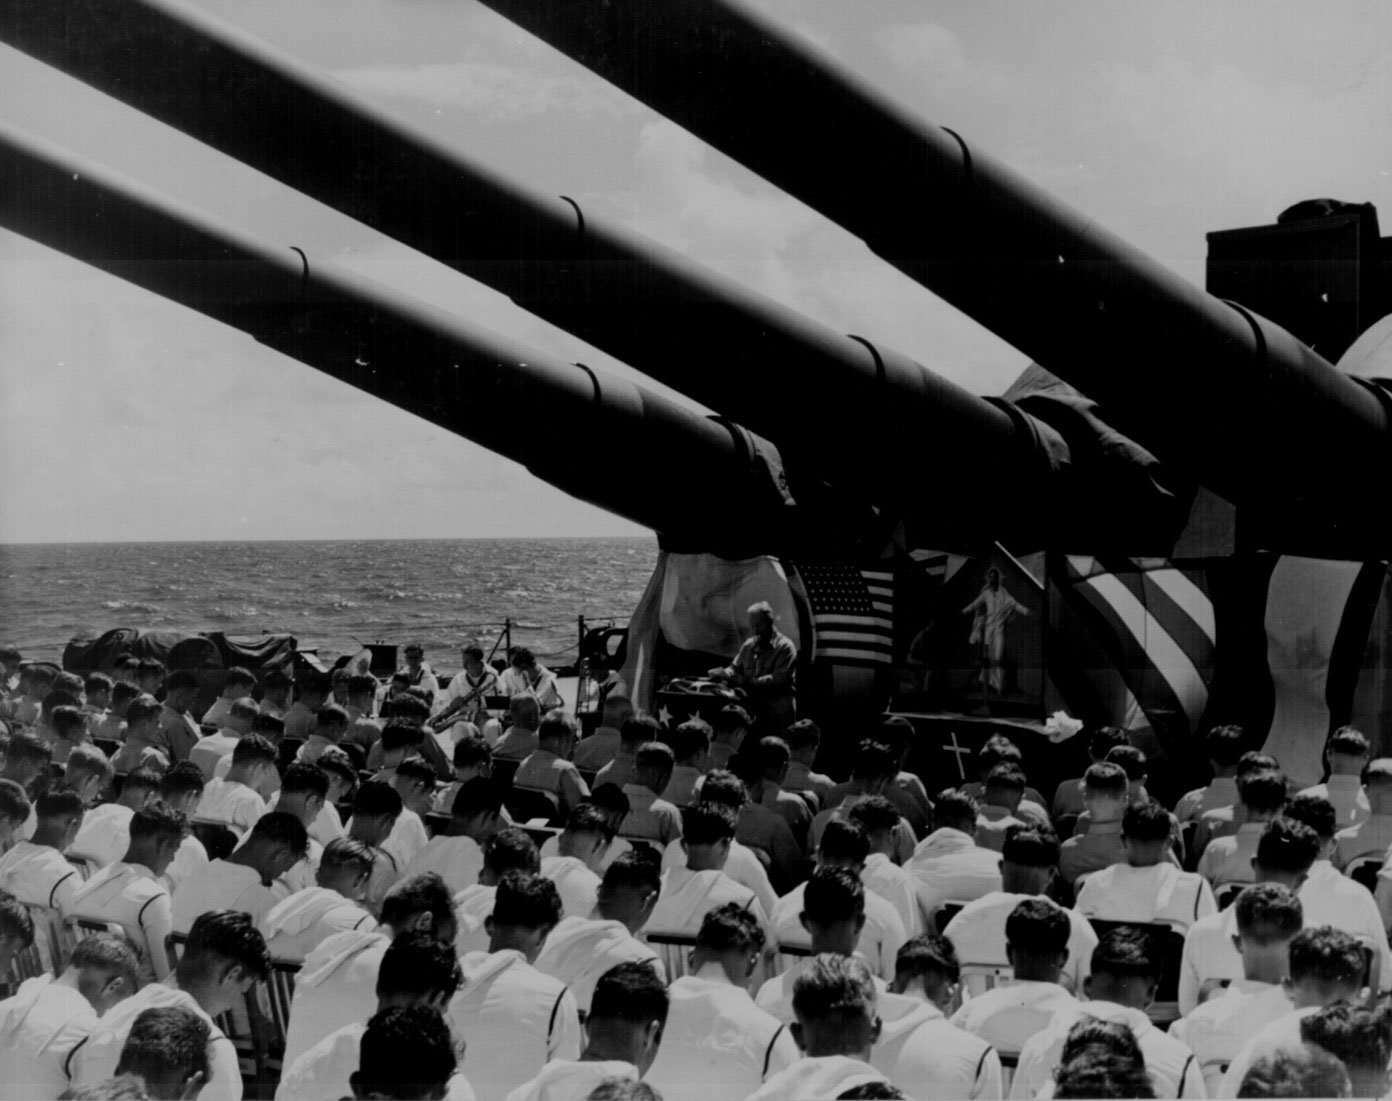 US Navy Chaplain N. D. Lindner leading a memorial service aboard USS South Dakota for men lost to air attacks, off Guam, 1 Jul 1944